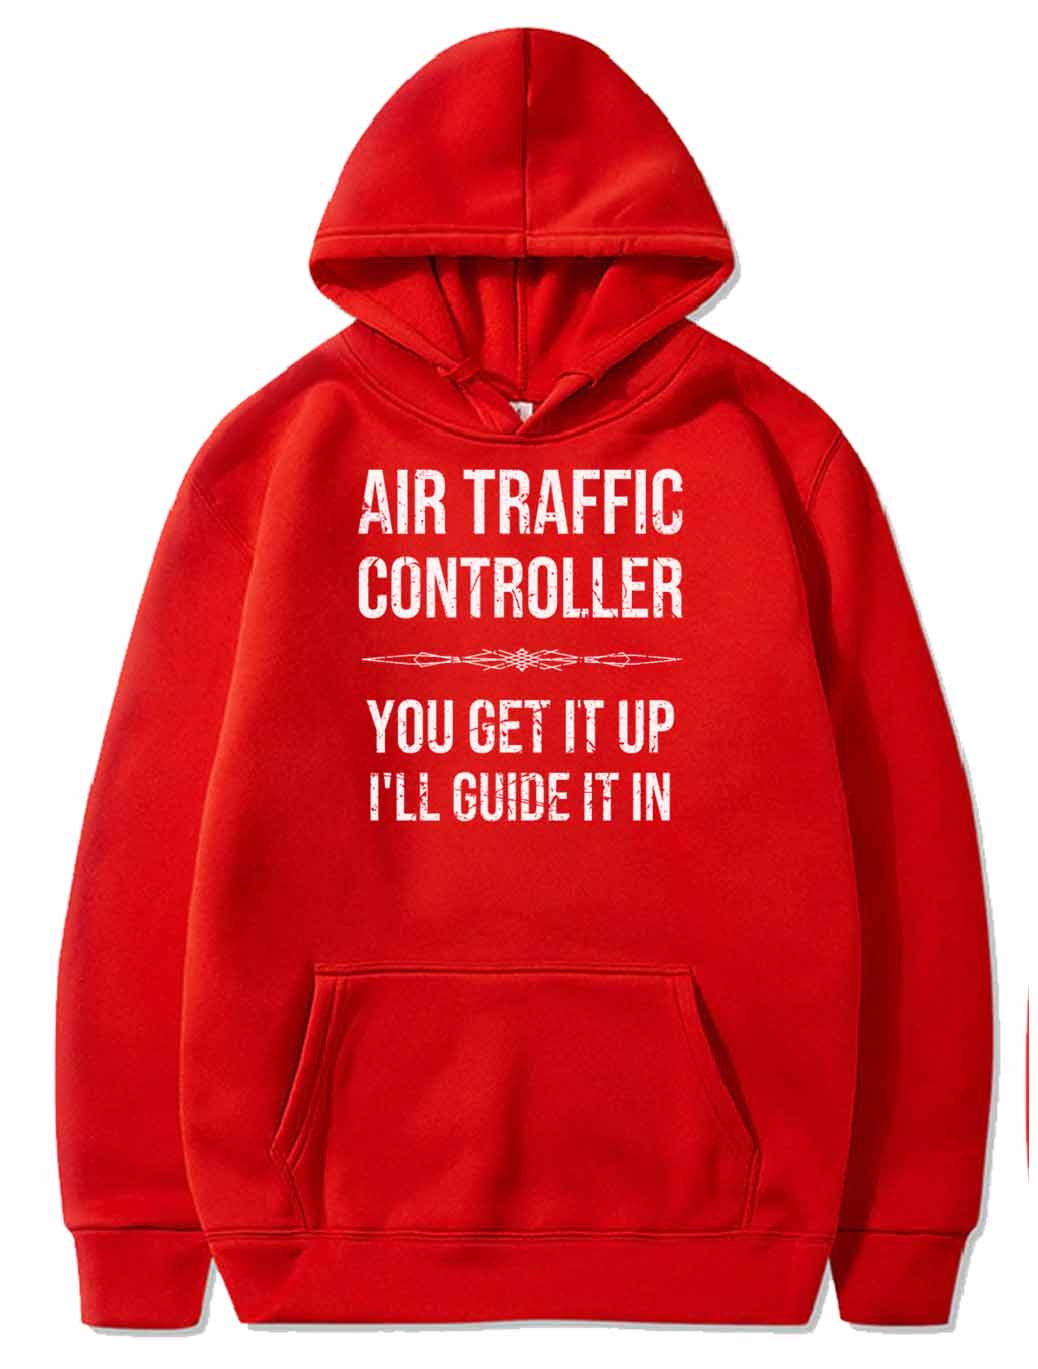 Air Traffic Controller  Guide It In  ATC Gift PULLOVER THE AV8R